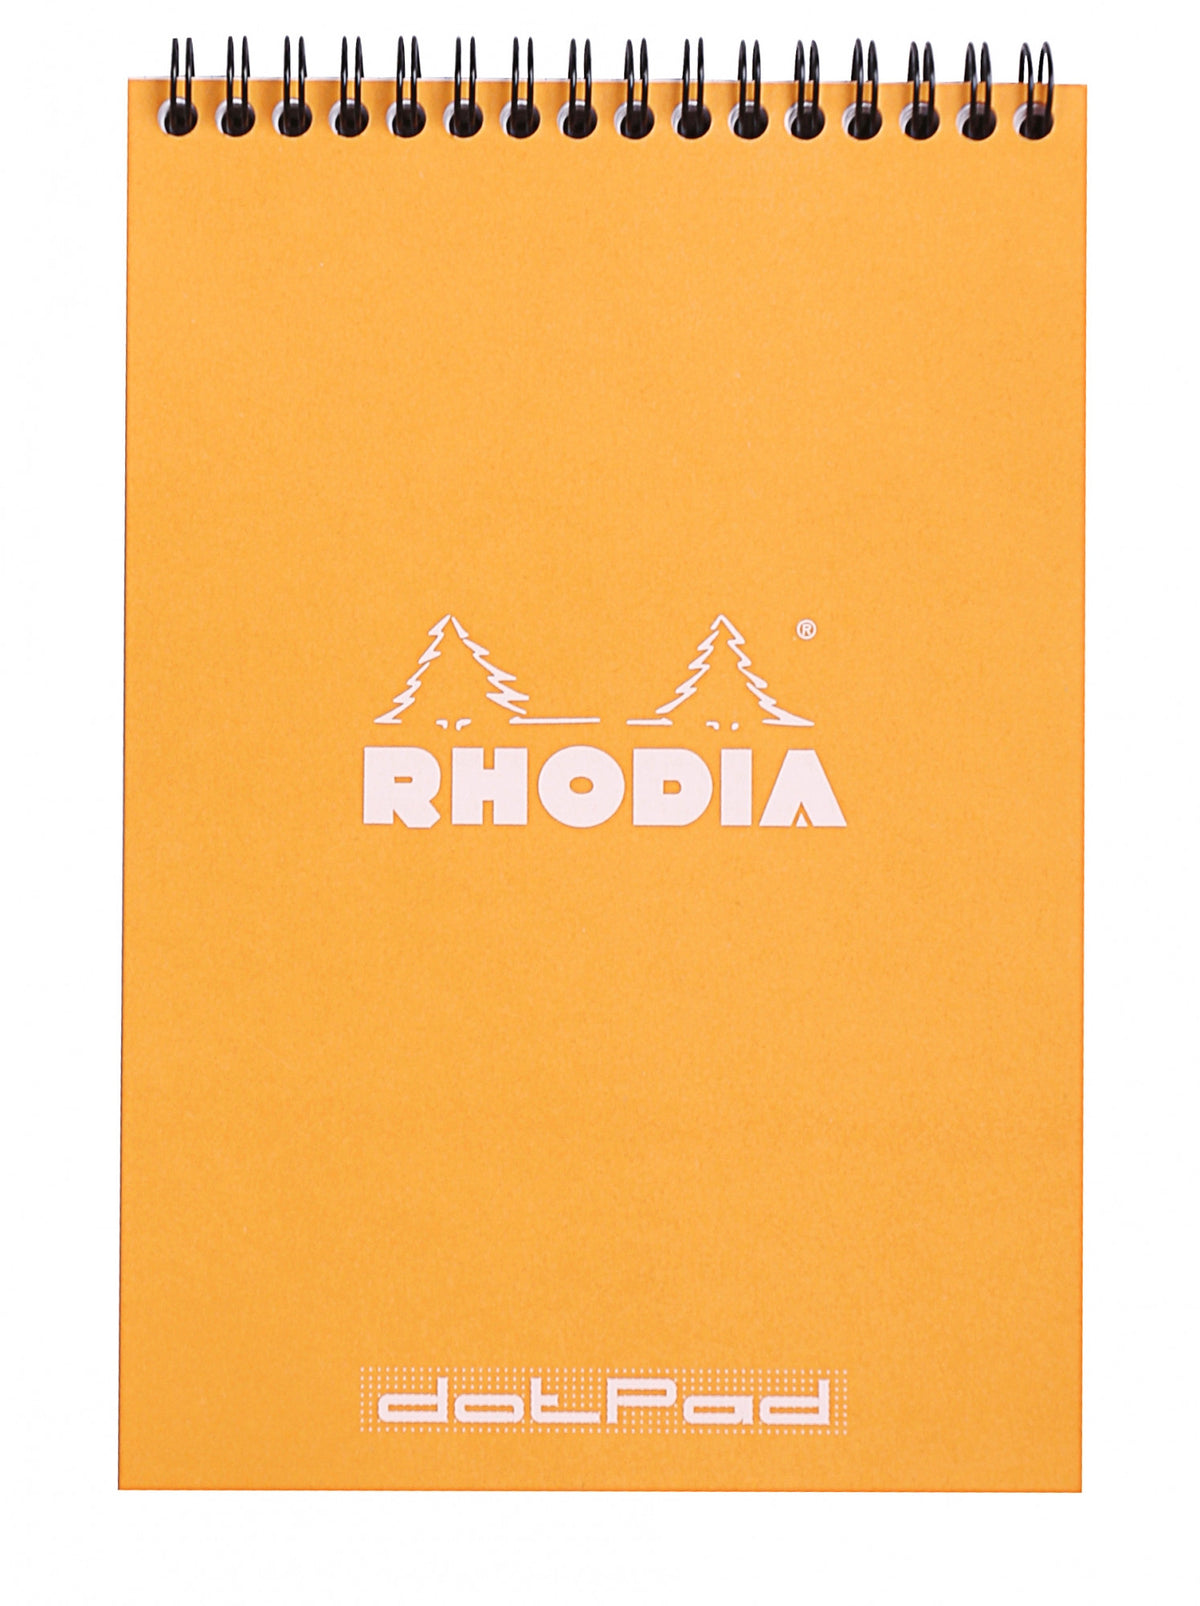 #16 top wirebound notepad with an orange cover, from Rhodia.  Measures 6 x 8 ¼" 80 Sheets (160 Pages) Available in Lined, Dot & Graph White Acid-Free Paper Paper Weight: 80 GSM